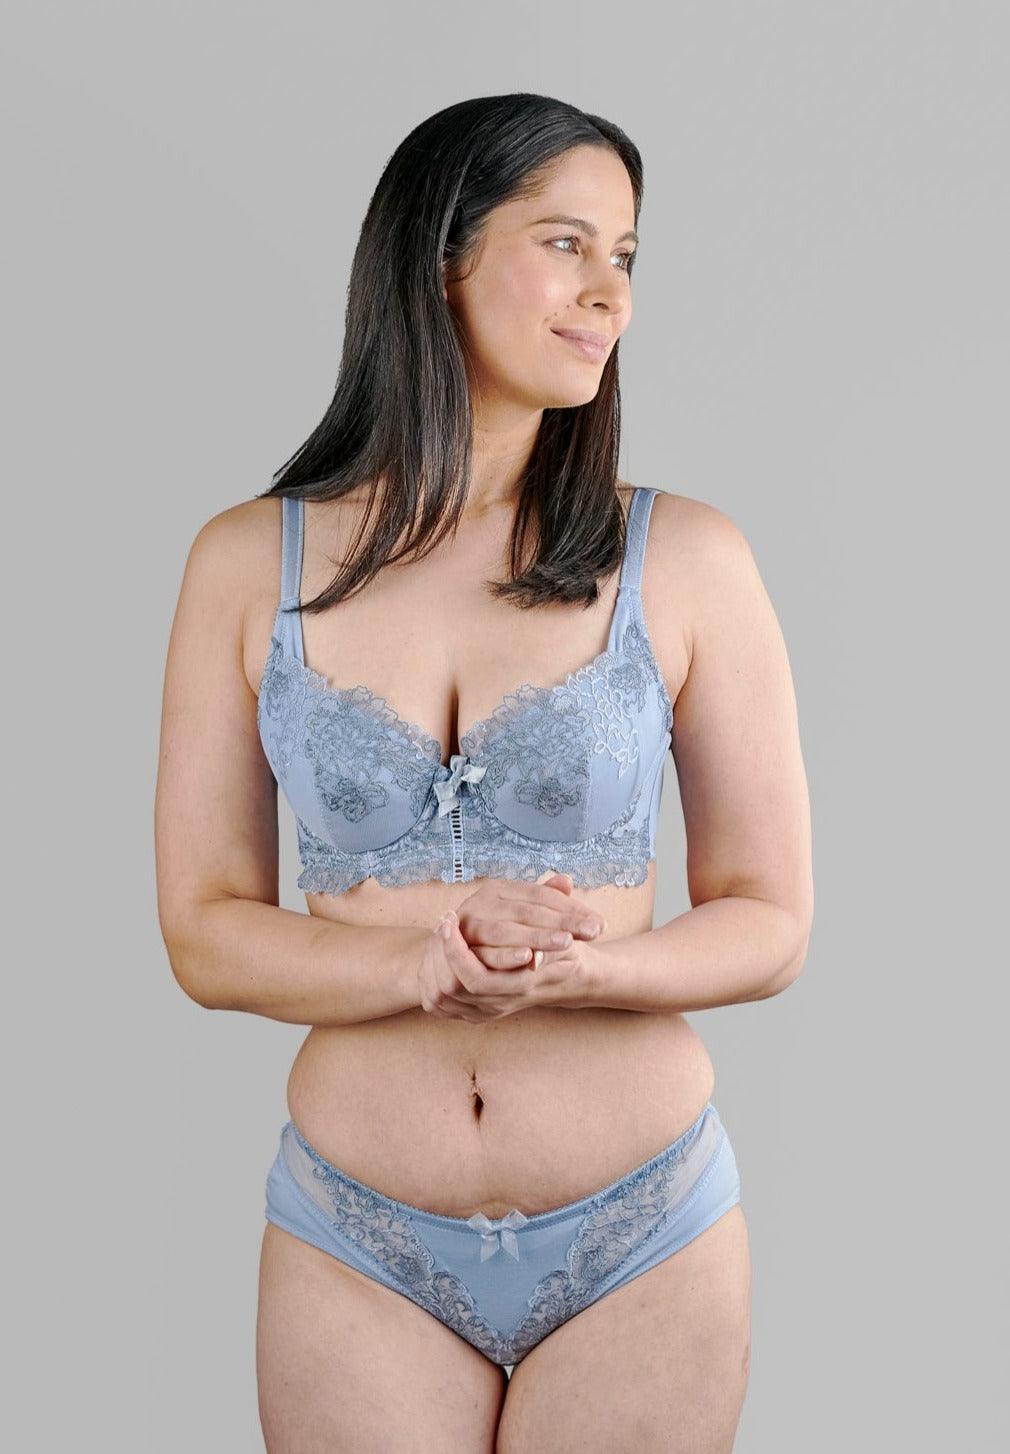 Why Do I Have a Rash on My Breasts? – Juliemay Lingerie UK